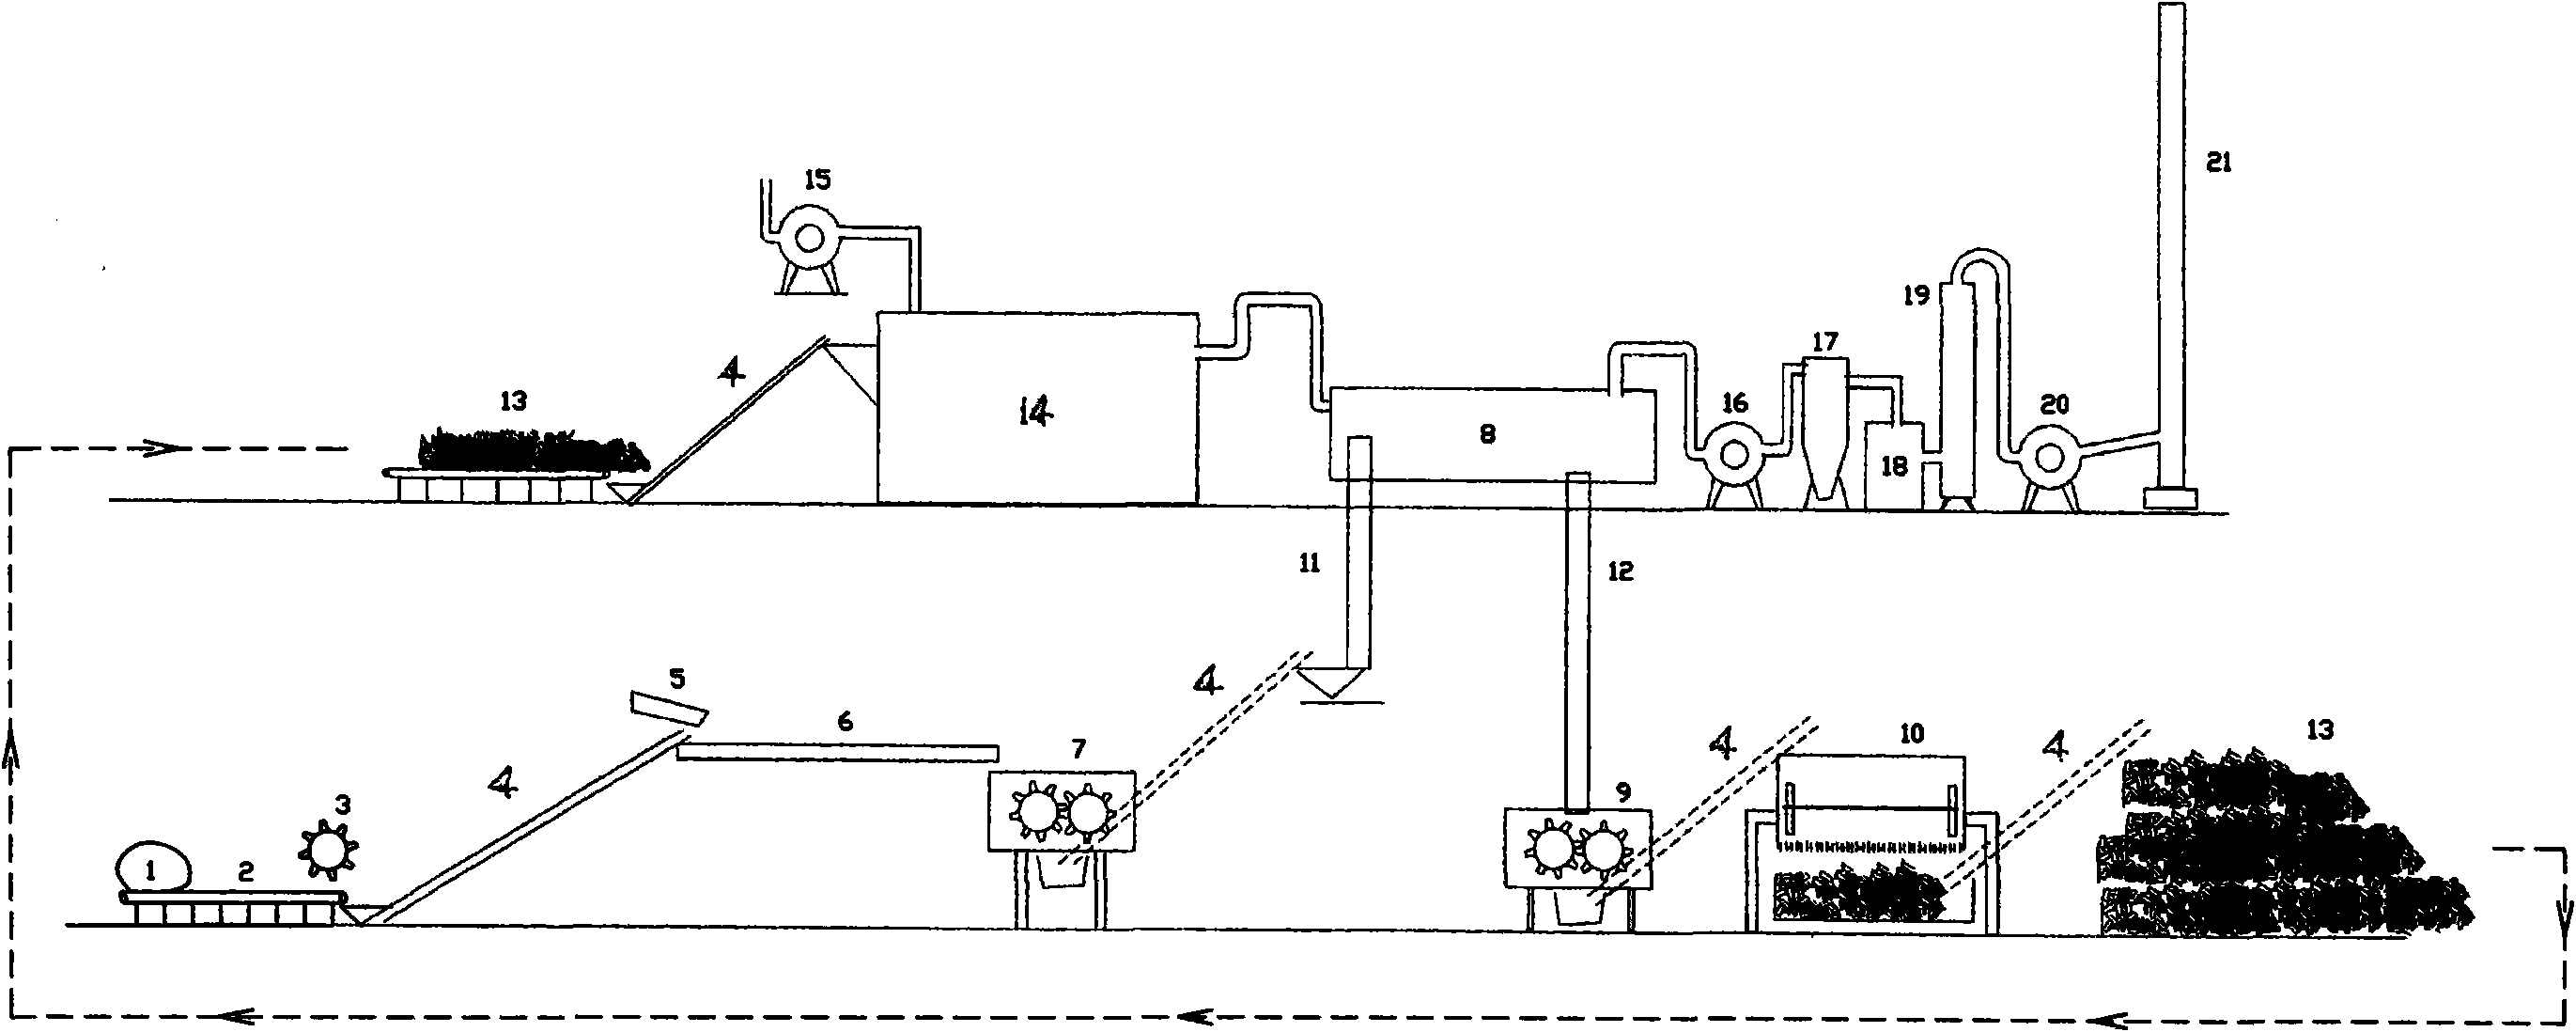 Harmless incineration disposal system and method for disposing domestic refuges